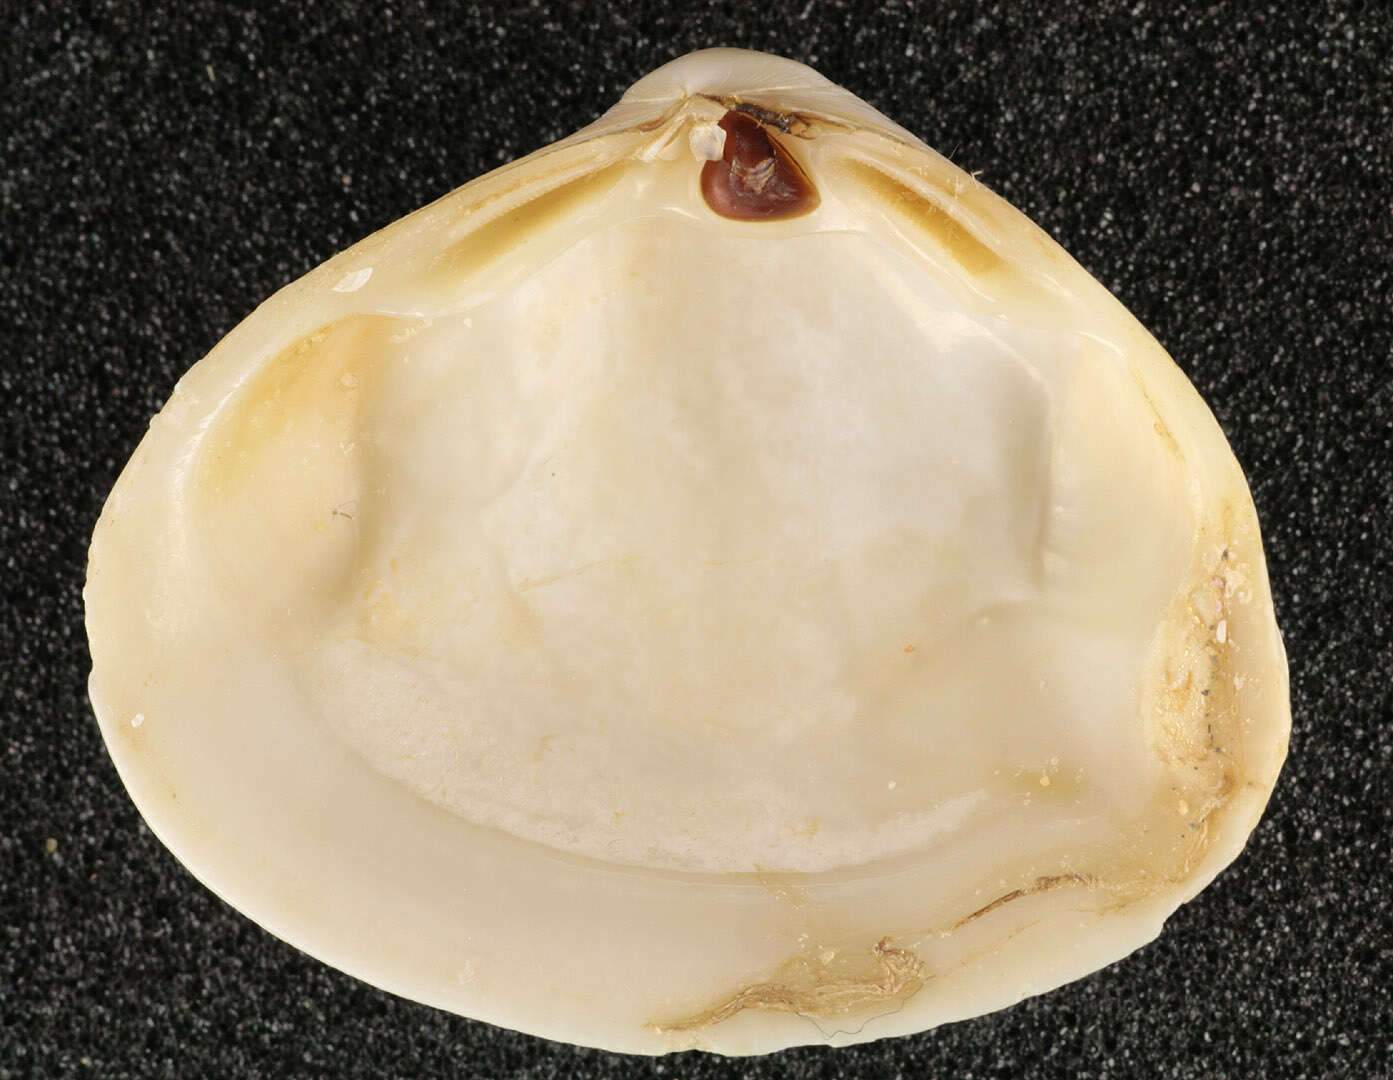 Image of surf clam